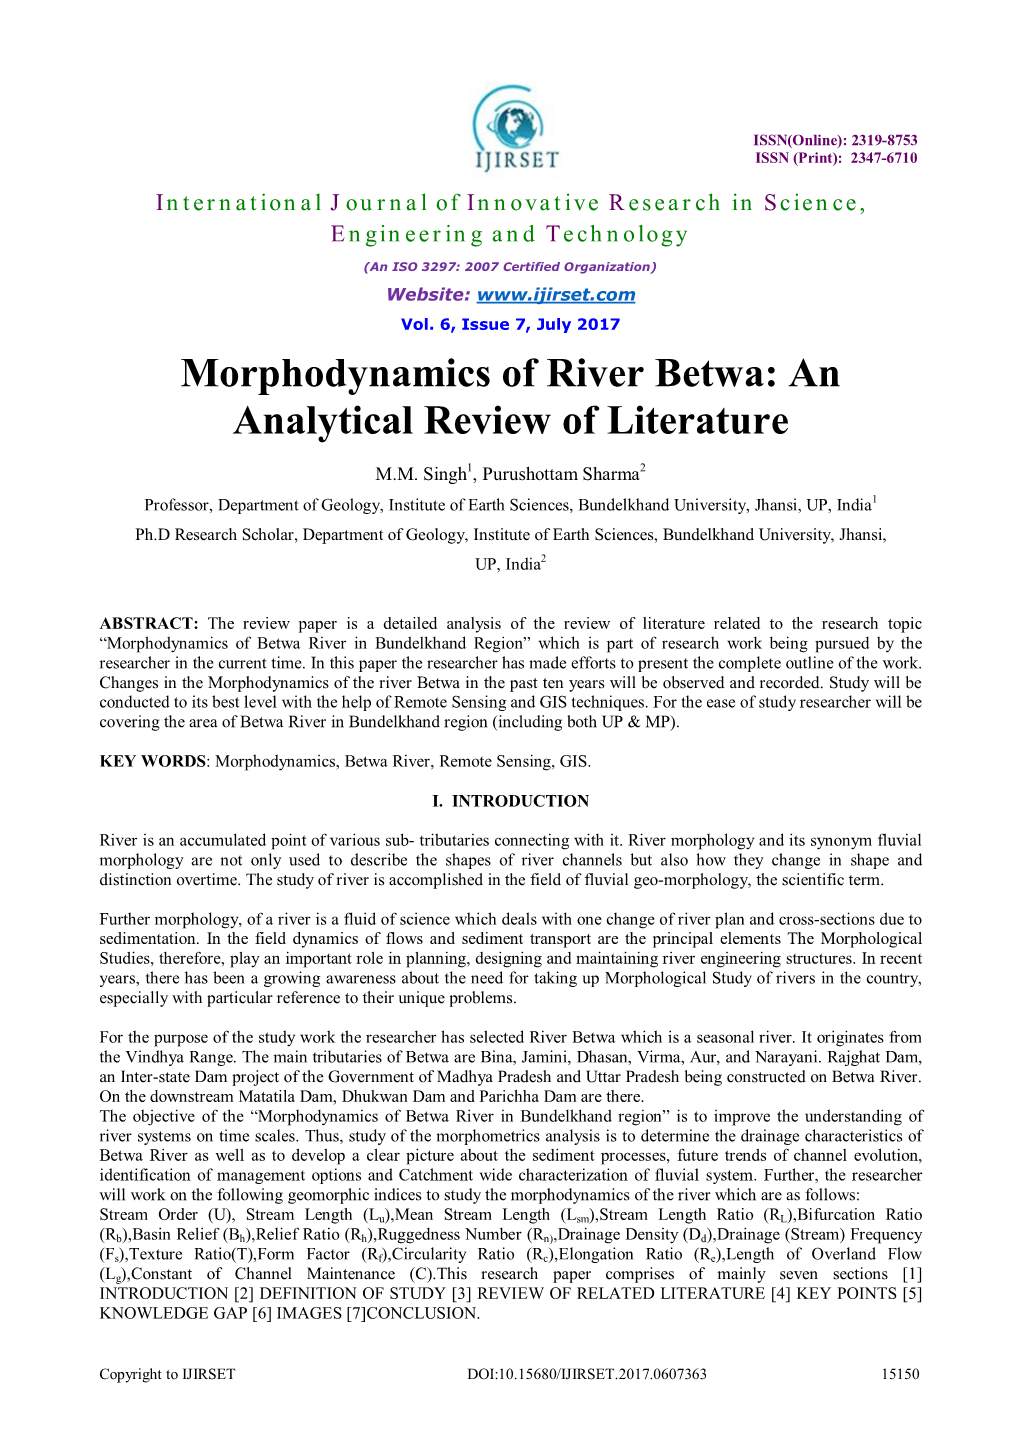 Morphodynamics of River Betwa: an Analytical Review of Literature